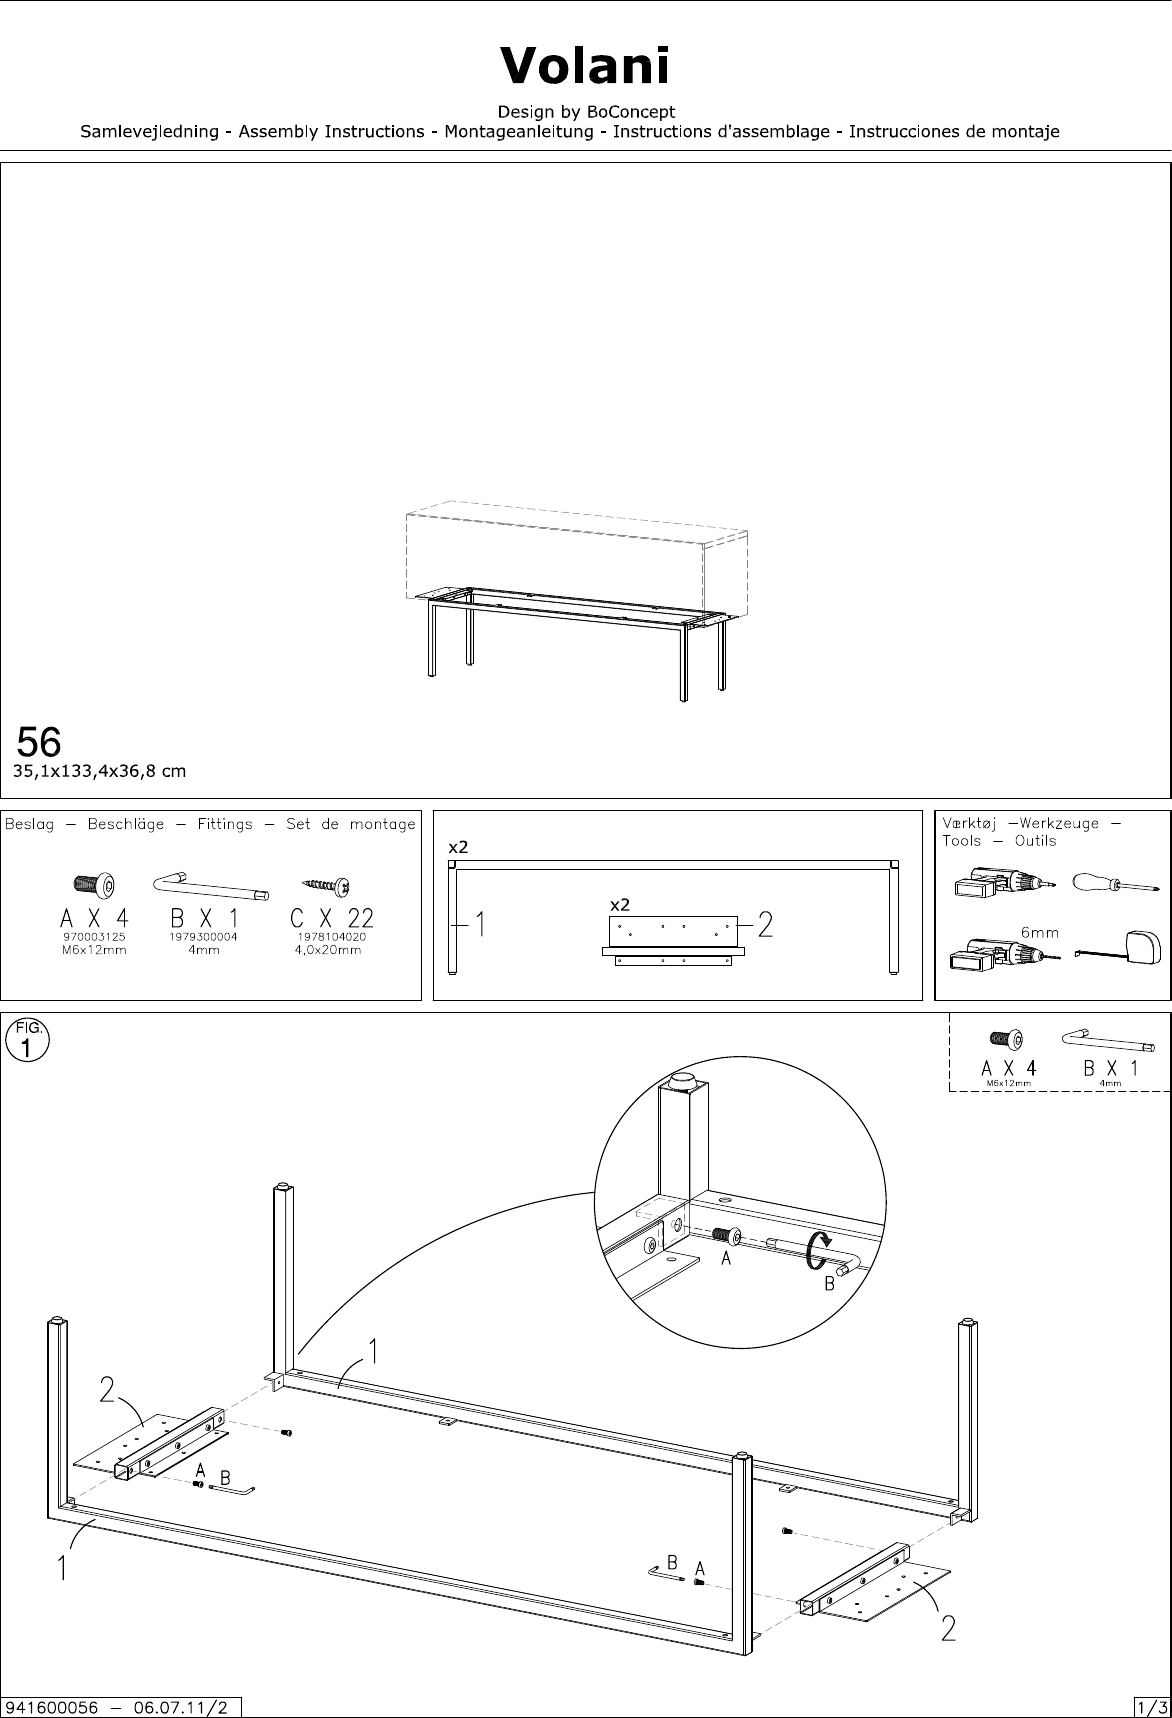 Page 1 of 3 - Boconcept Boconcept--56-Assembly-Instruction B:\DK_PTA_Share\Inventor Ation\360 Volani\Volani 0056\Assembly Instruction\941600056_v2_lev